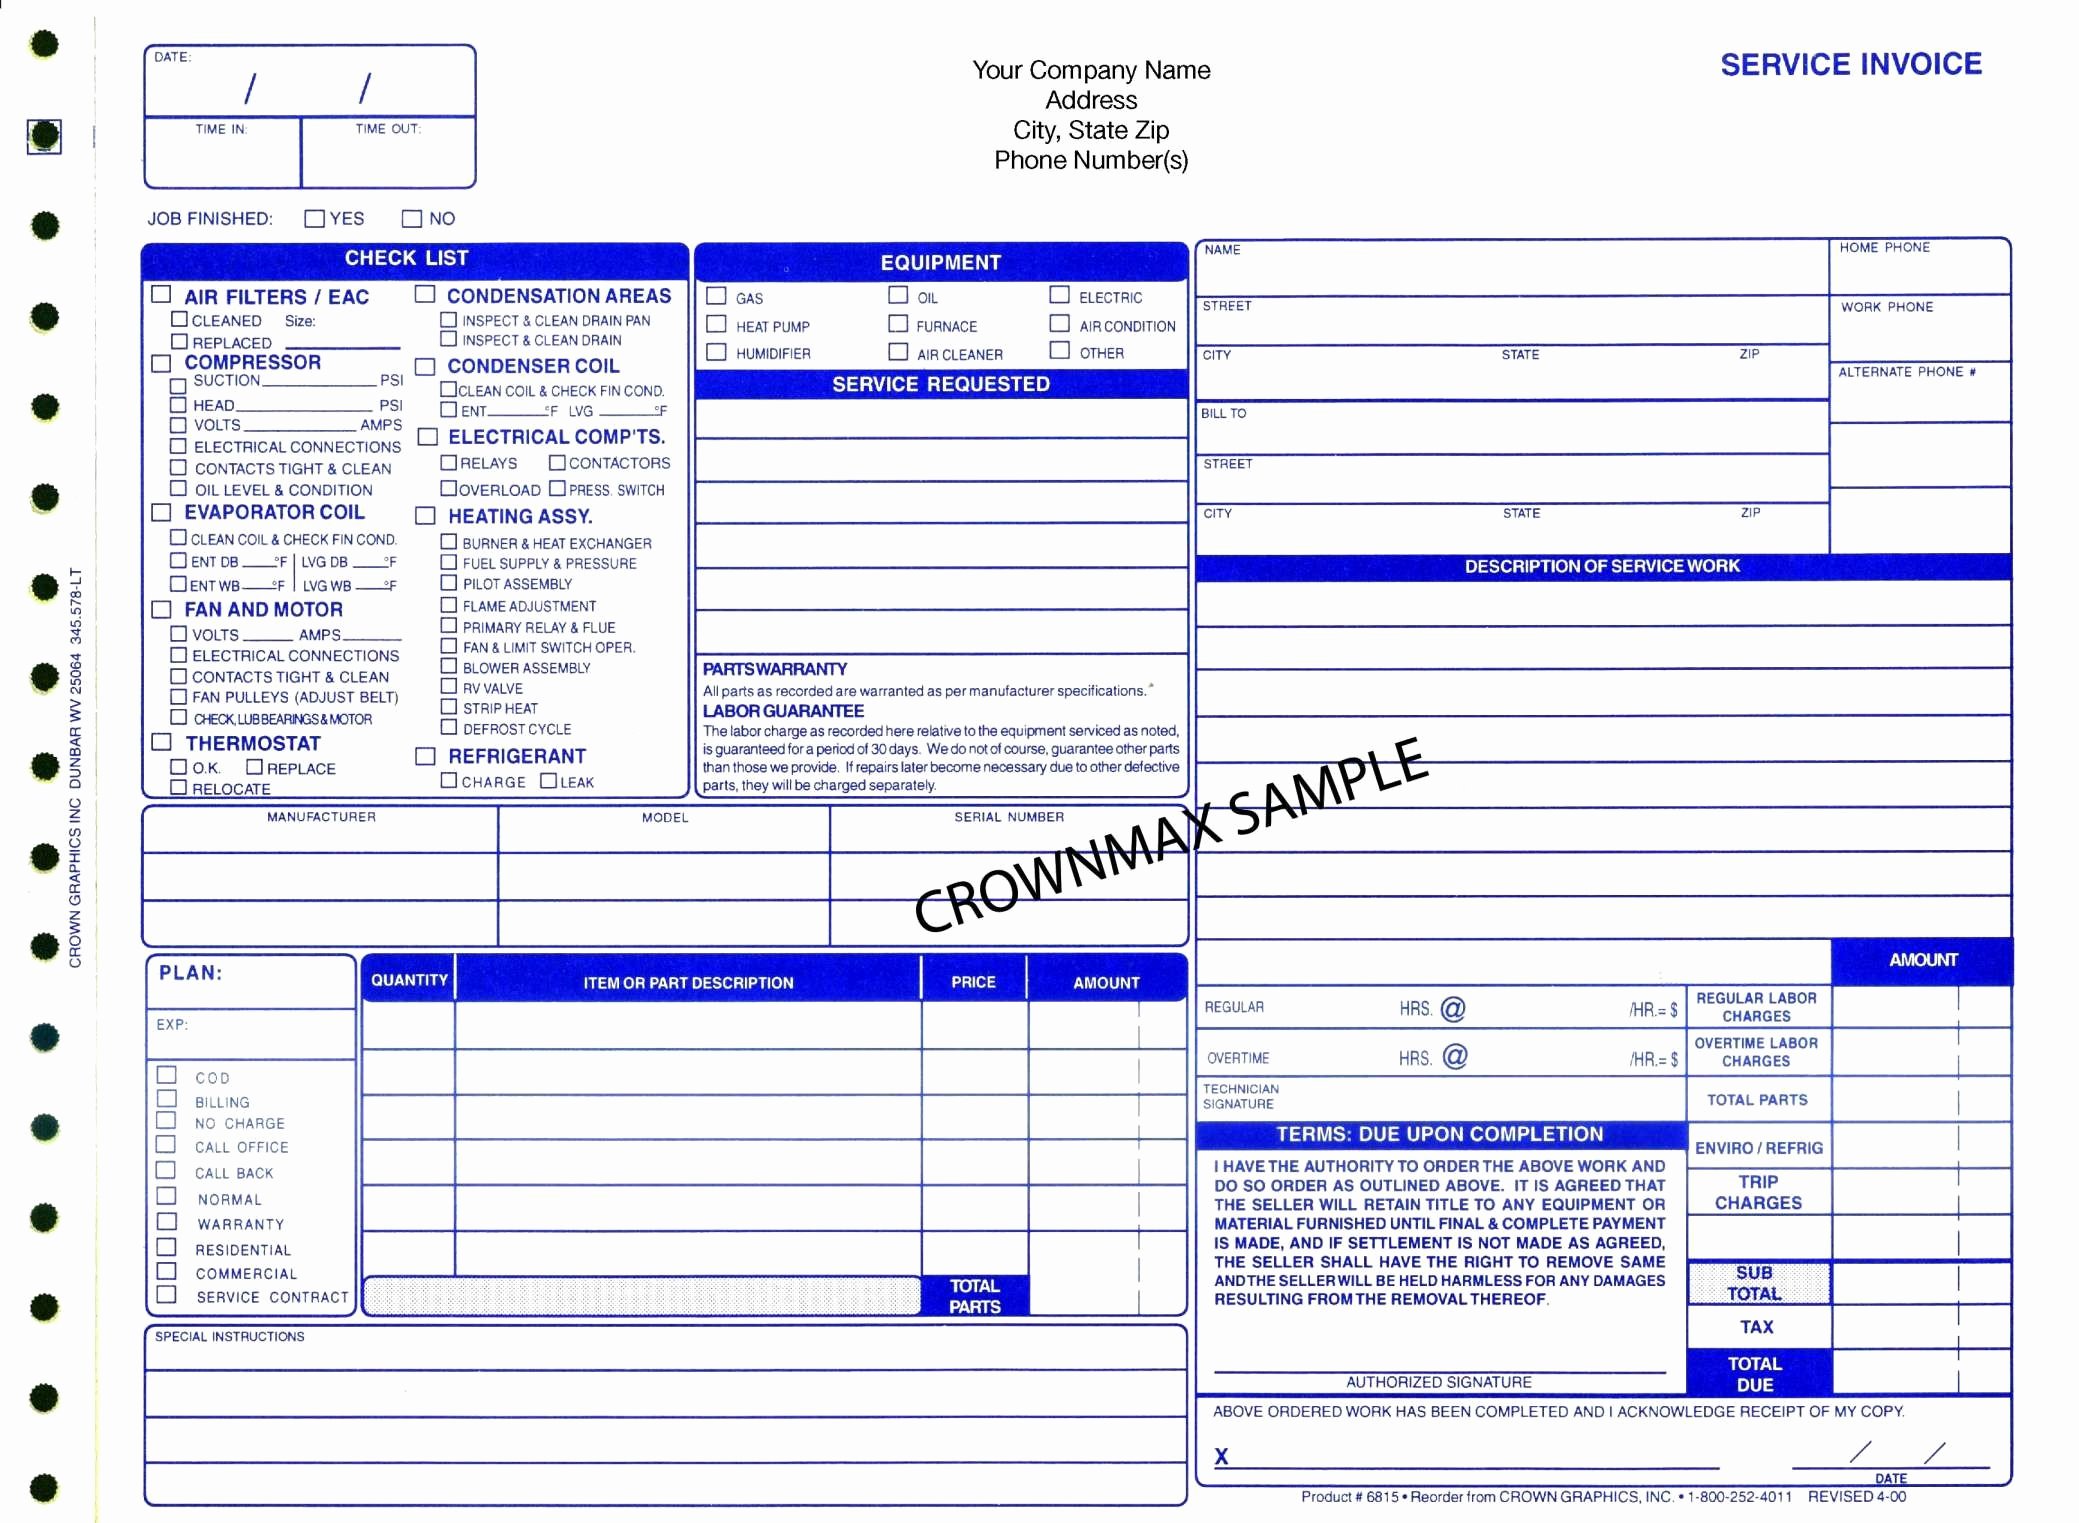 Hvac Service order Invoice Template Awesome Fascinating Hvacnvoice Template Resume Templates